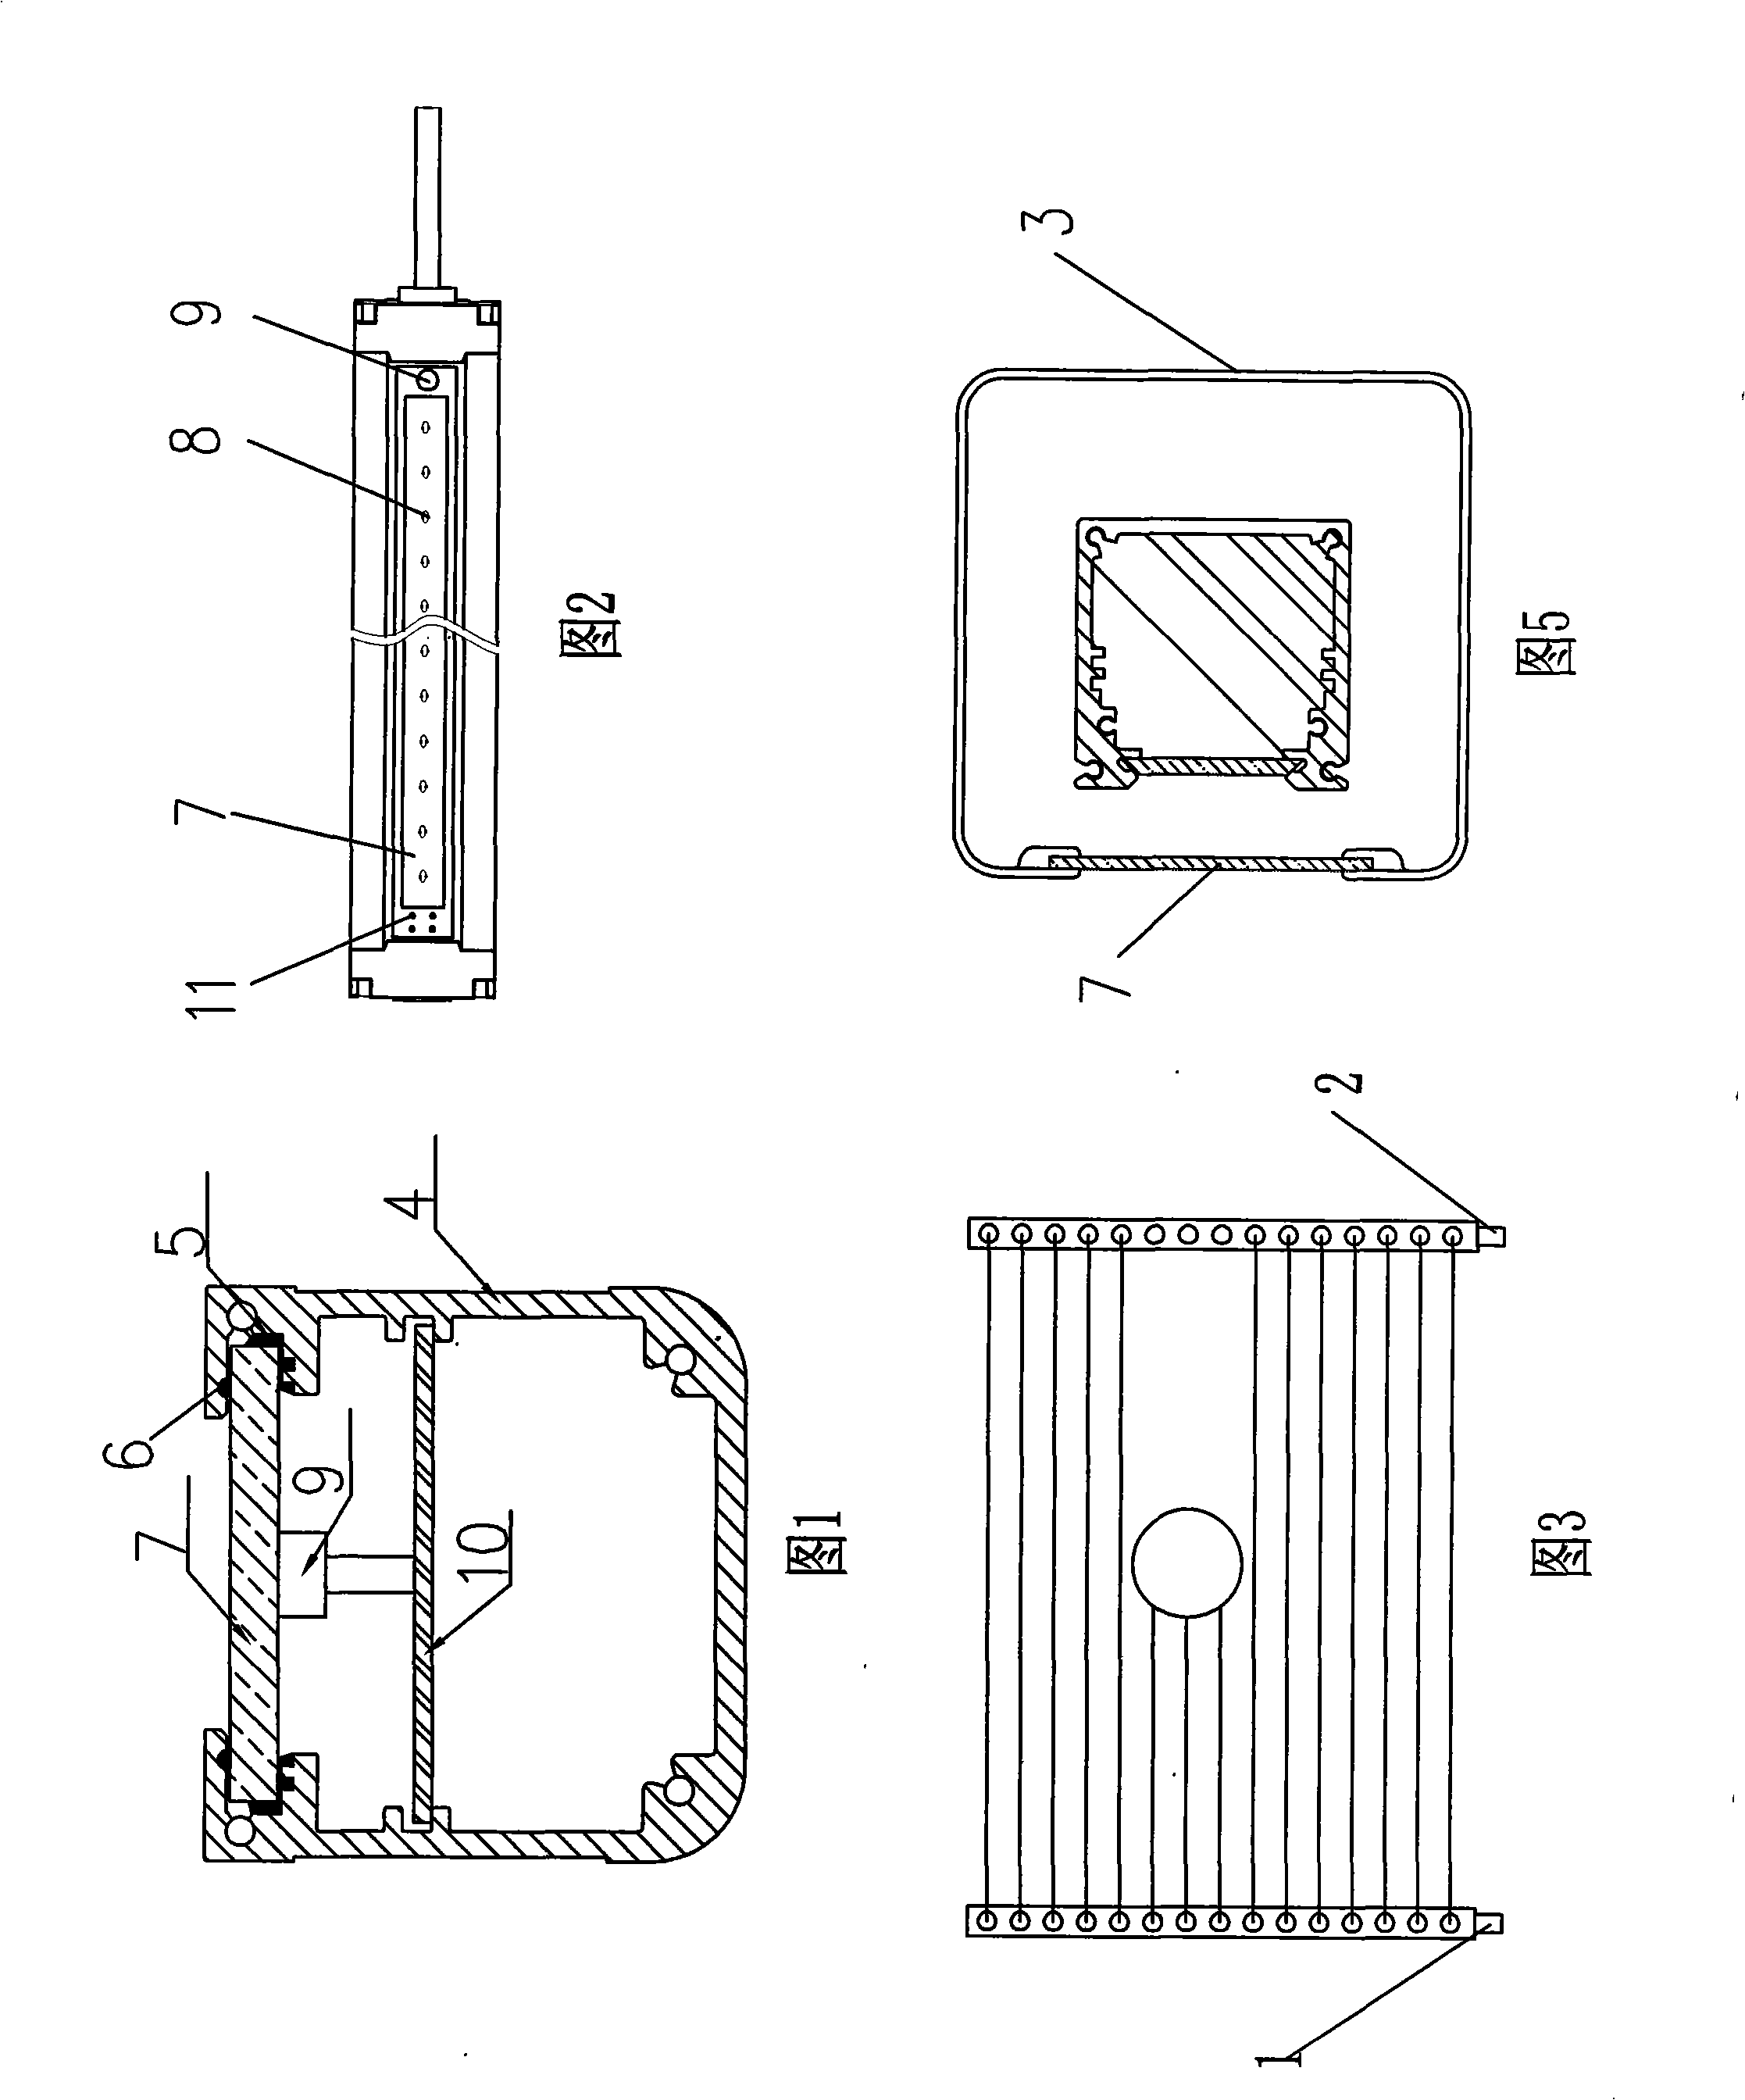 Infrared scanning vehicle separator having automatic heating function